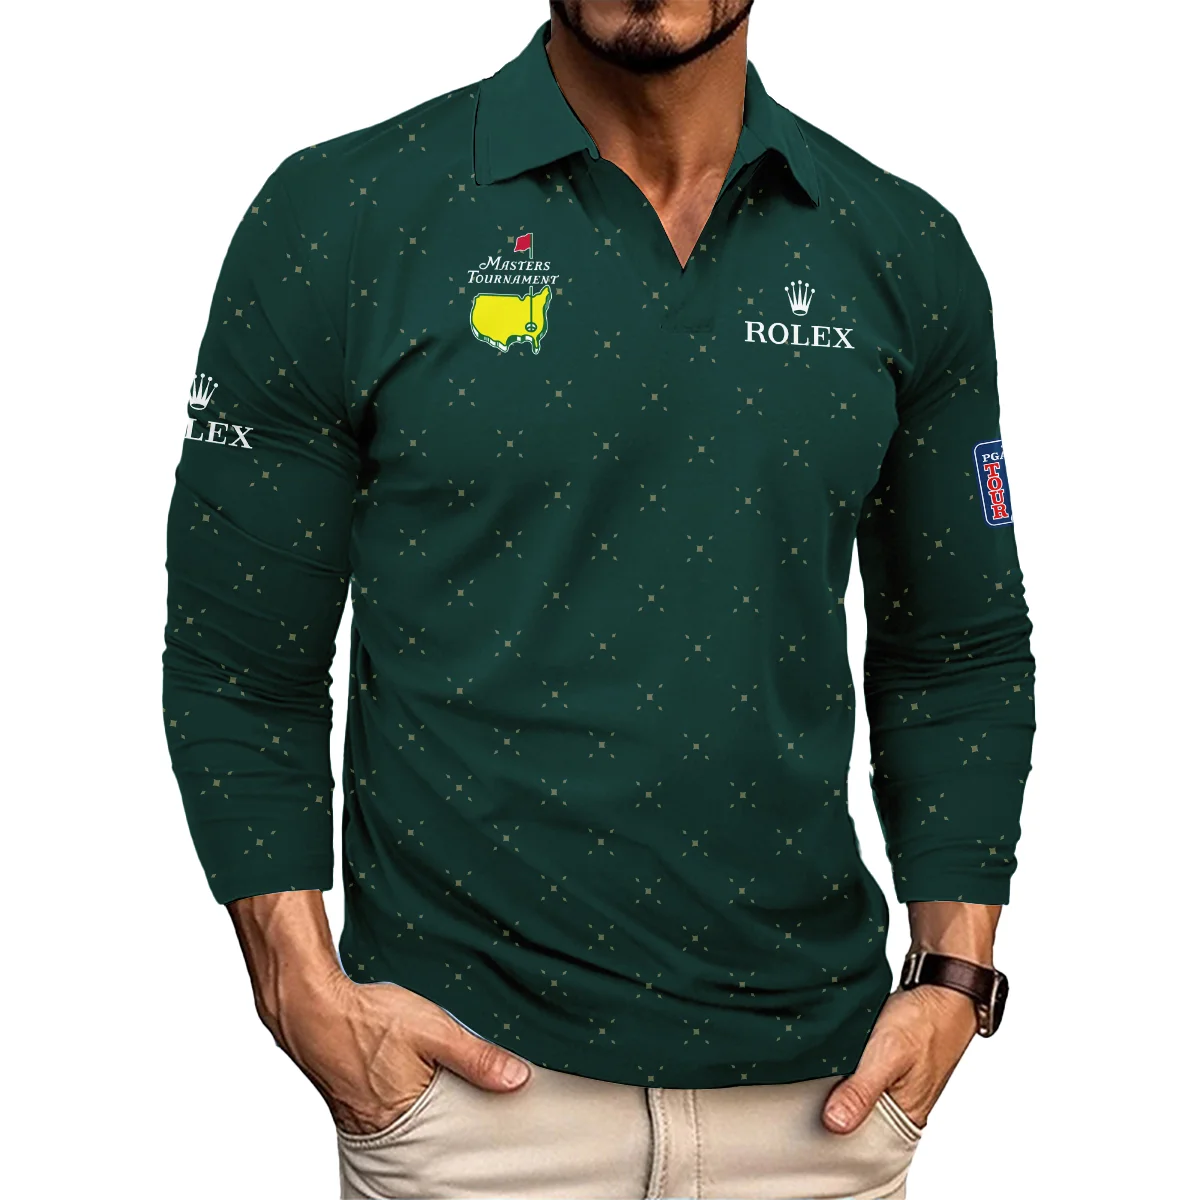 Diamond Shapes With Geometric Pattern Masters Tournament Rolex Vneck Long Polo Shirt Style Classic Long Polo Shirt For Men